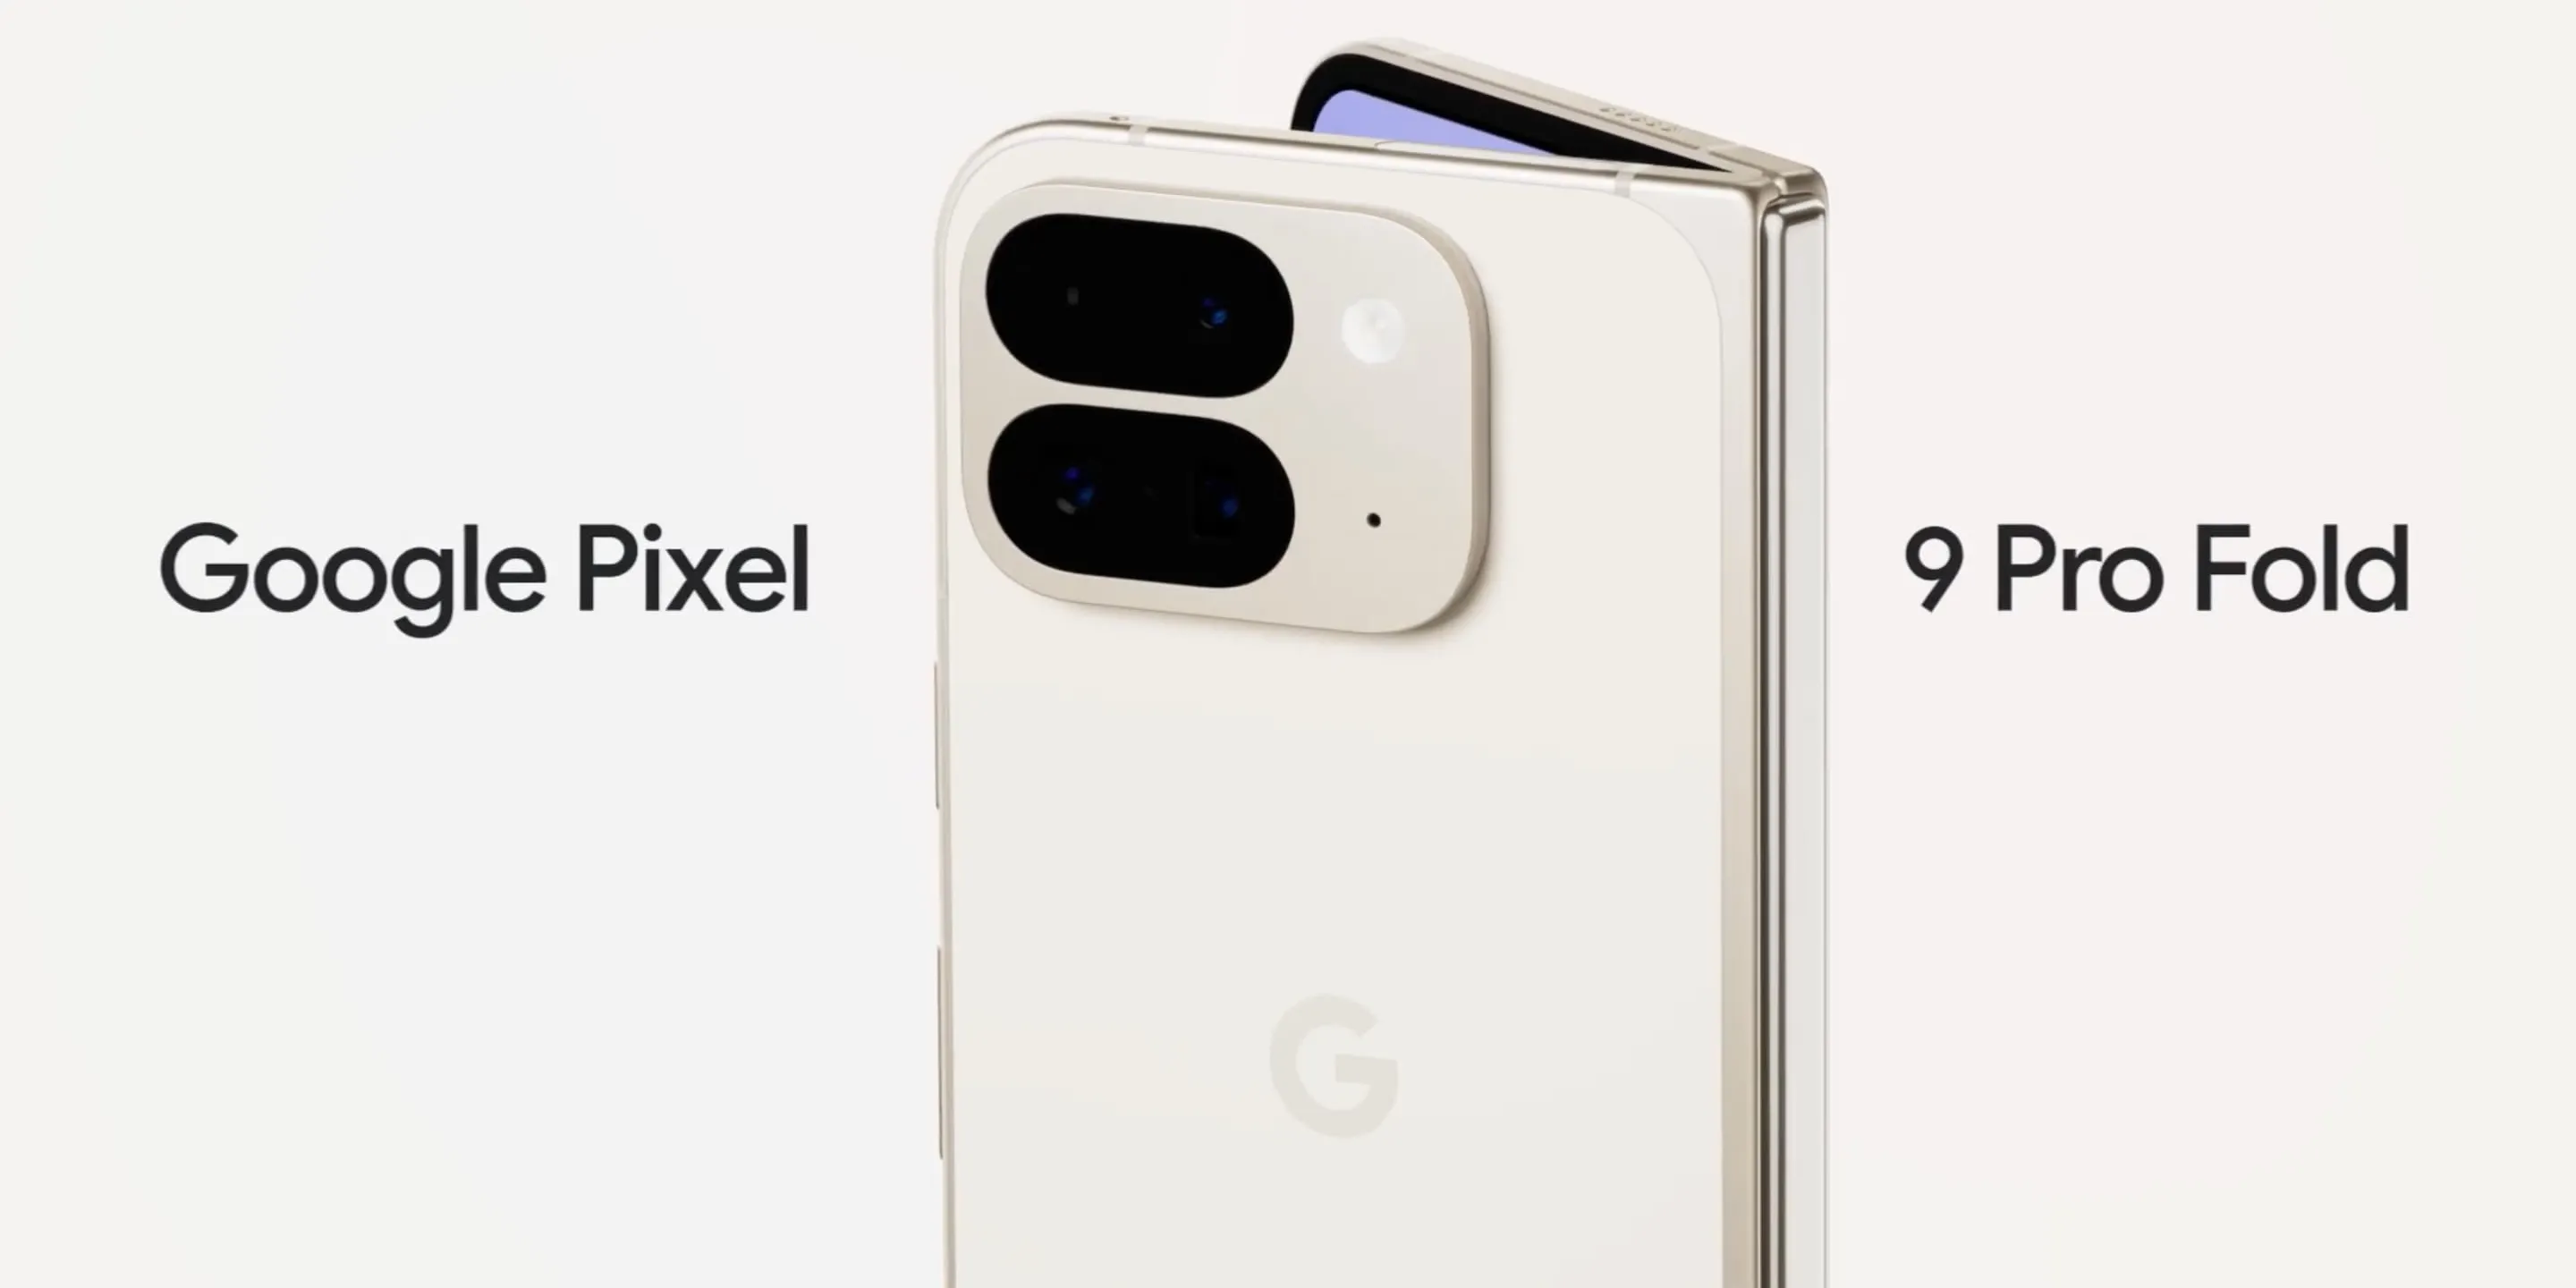 Google expands the list of countries where it plans to sell the Pixel 9 Pro Fold 